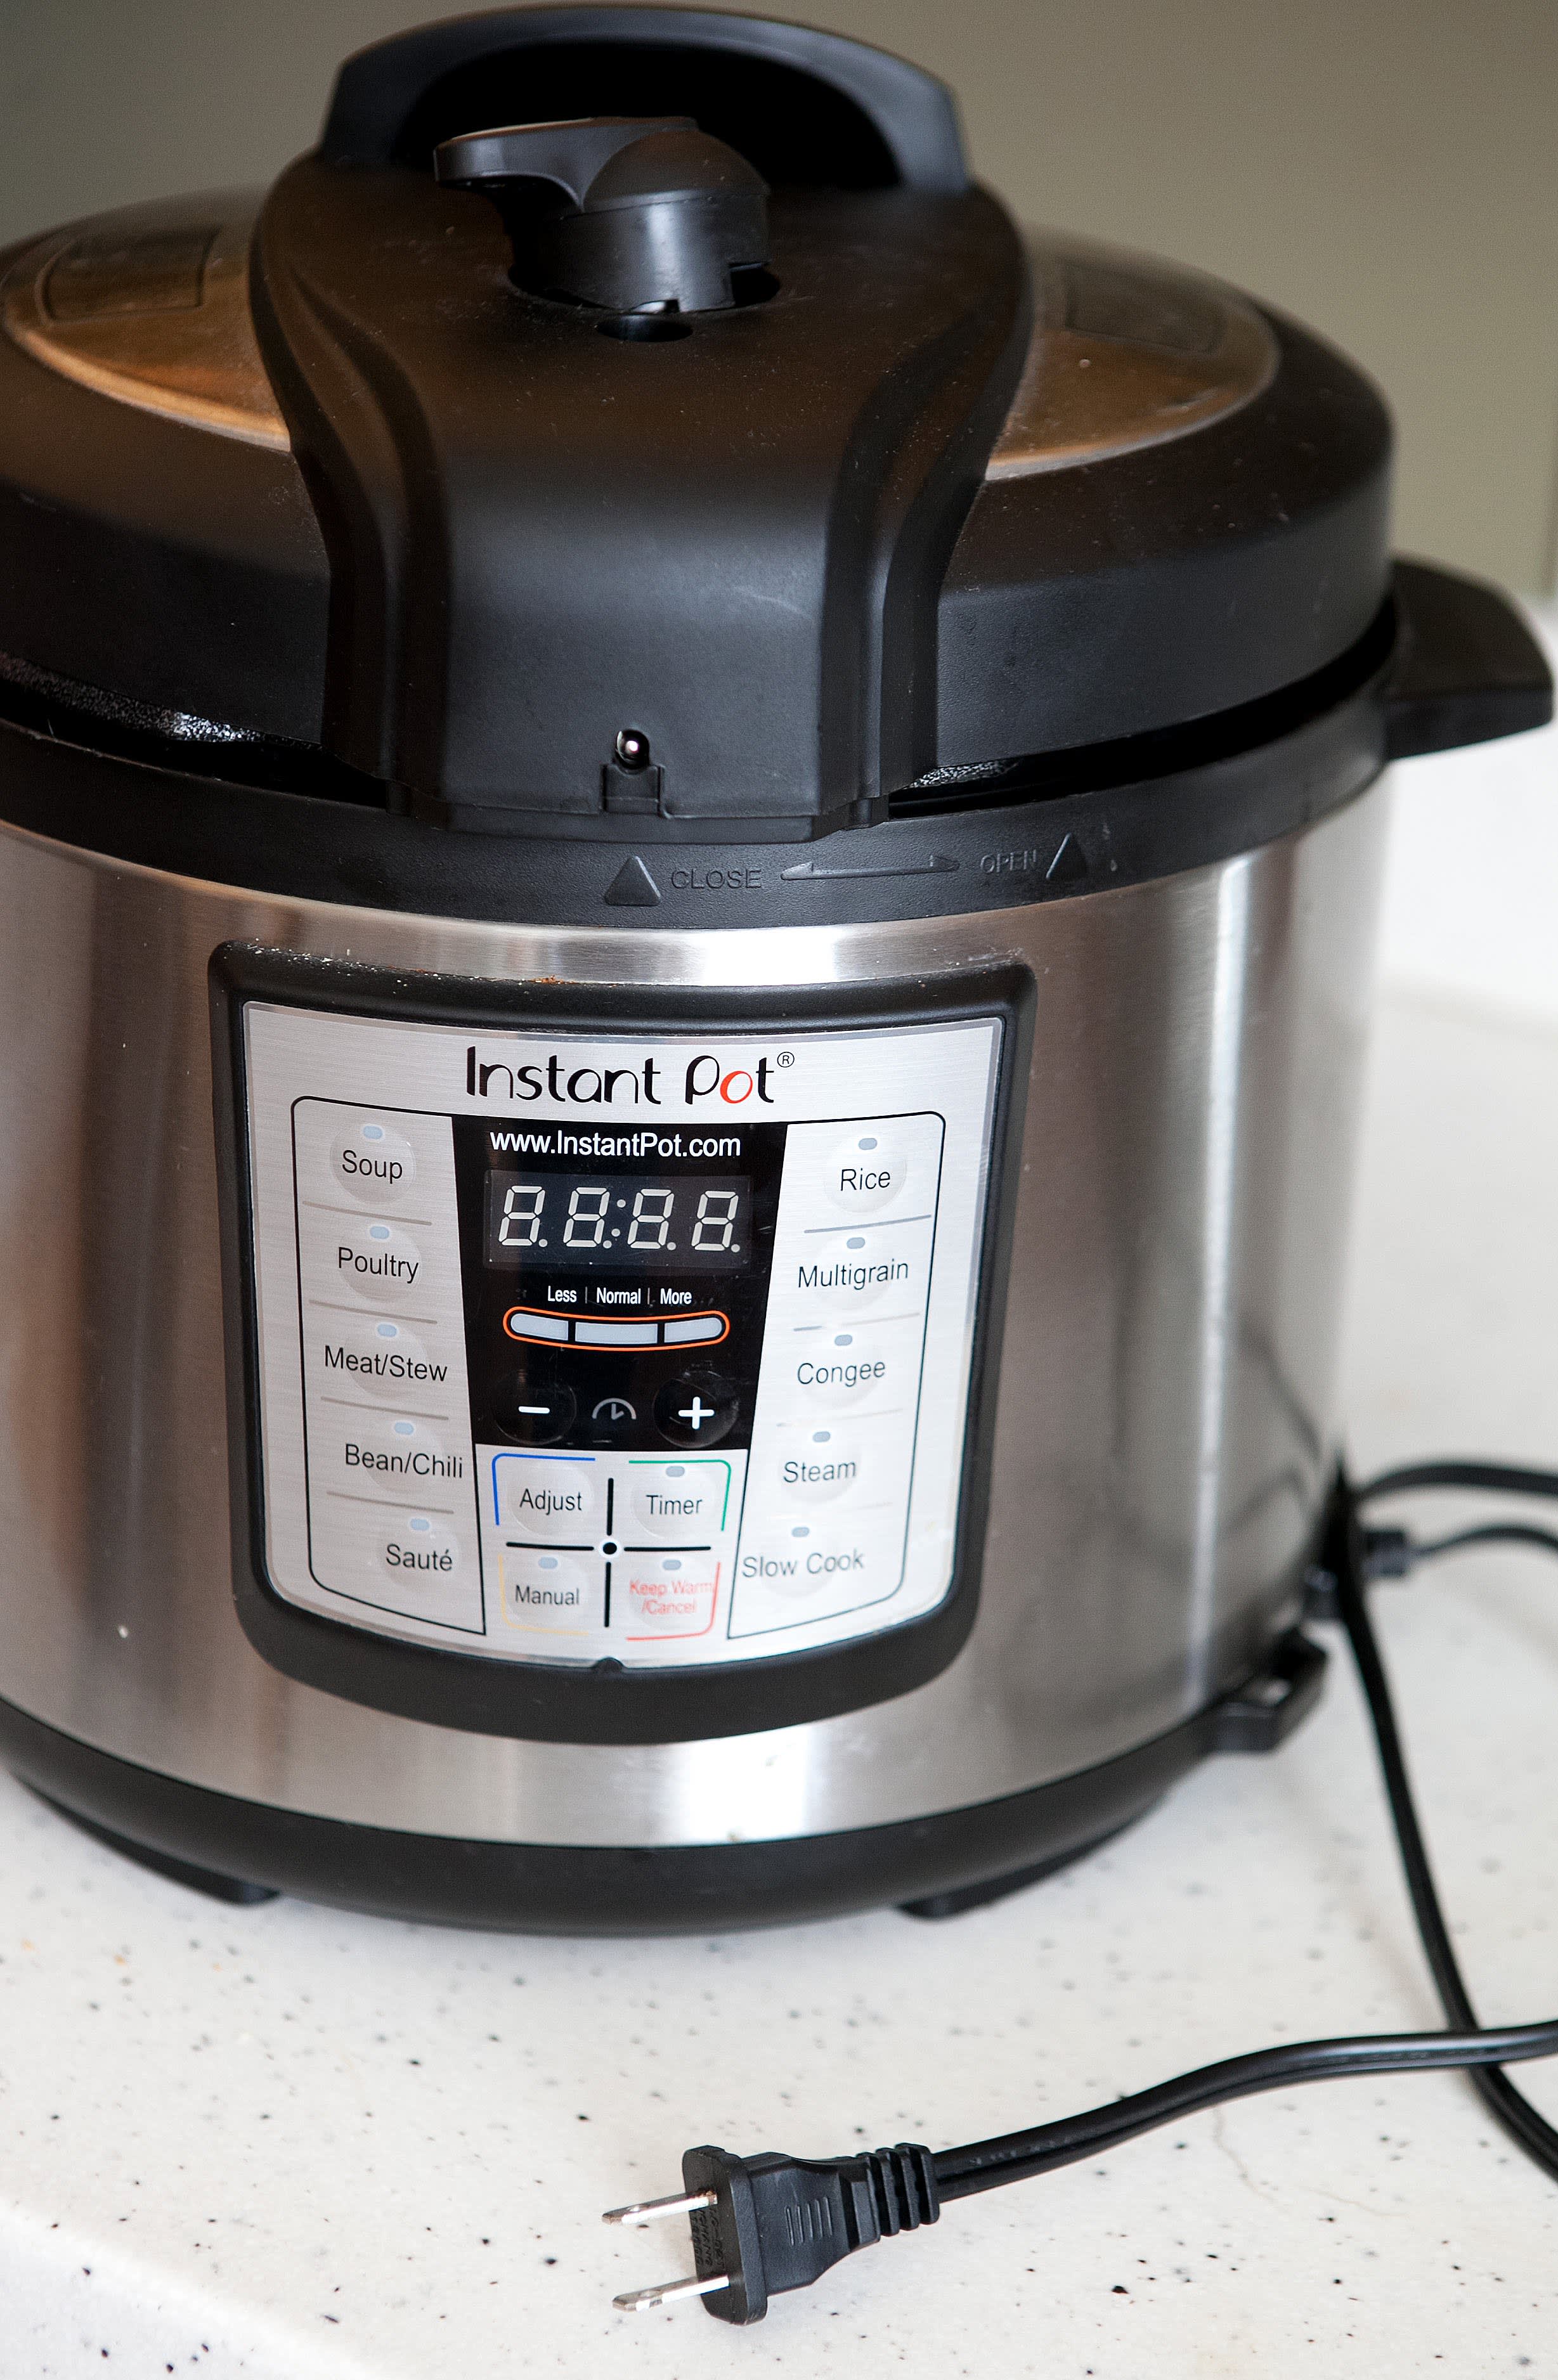 3 Simple Ways to Clean an Instant Pot Lid - wikiHow